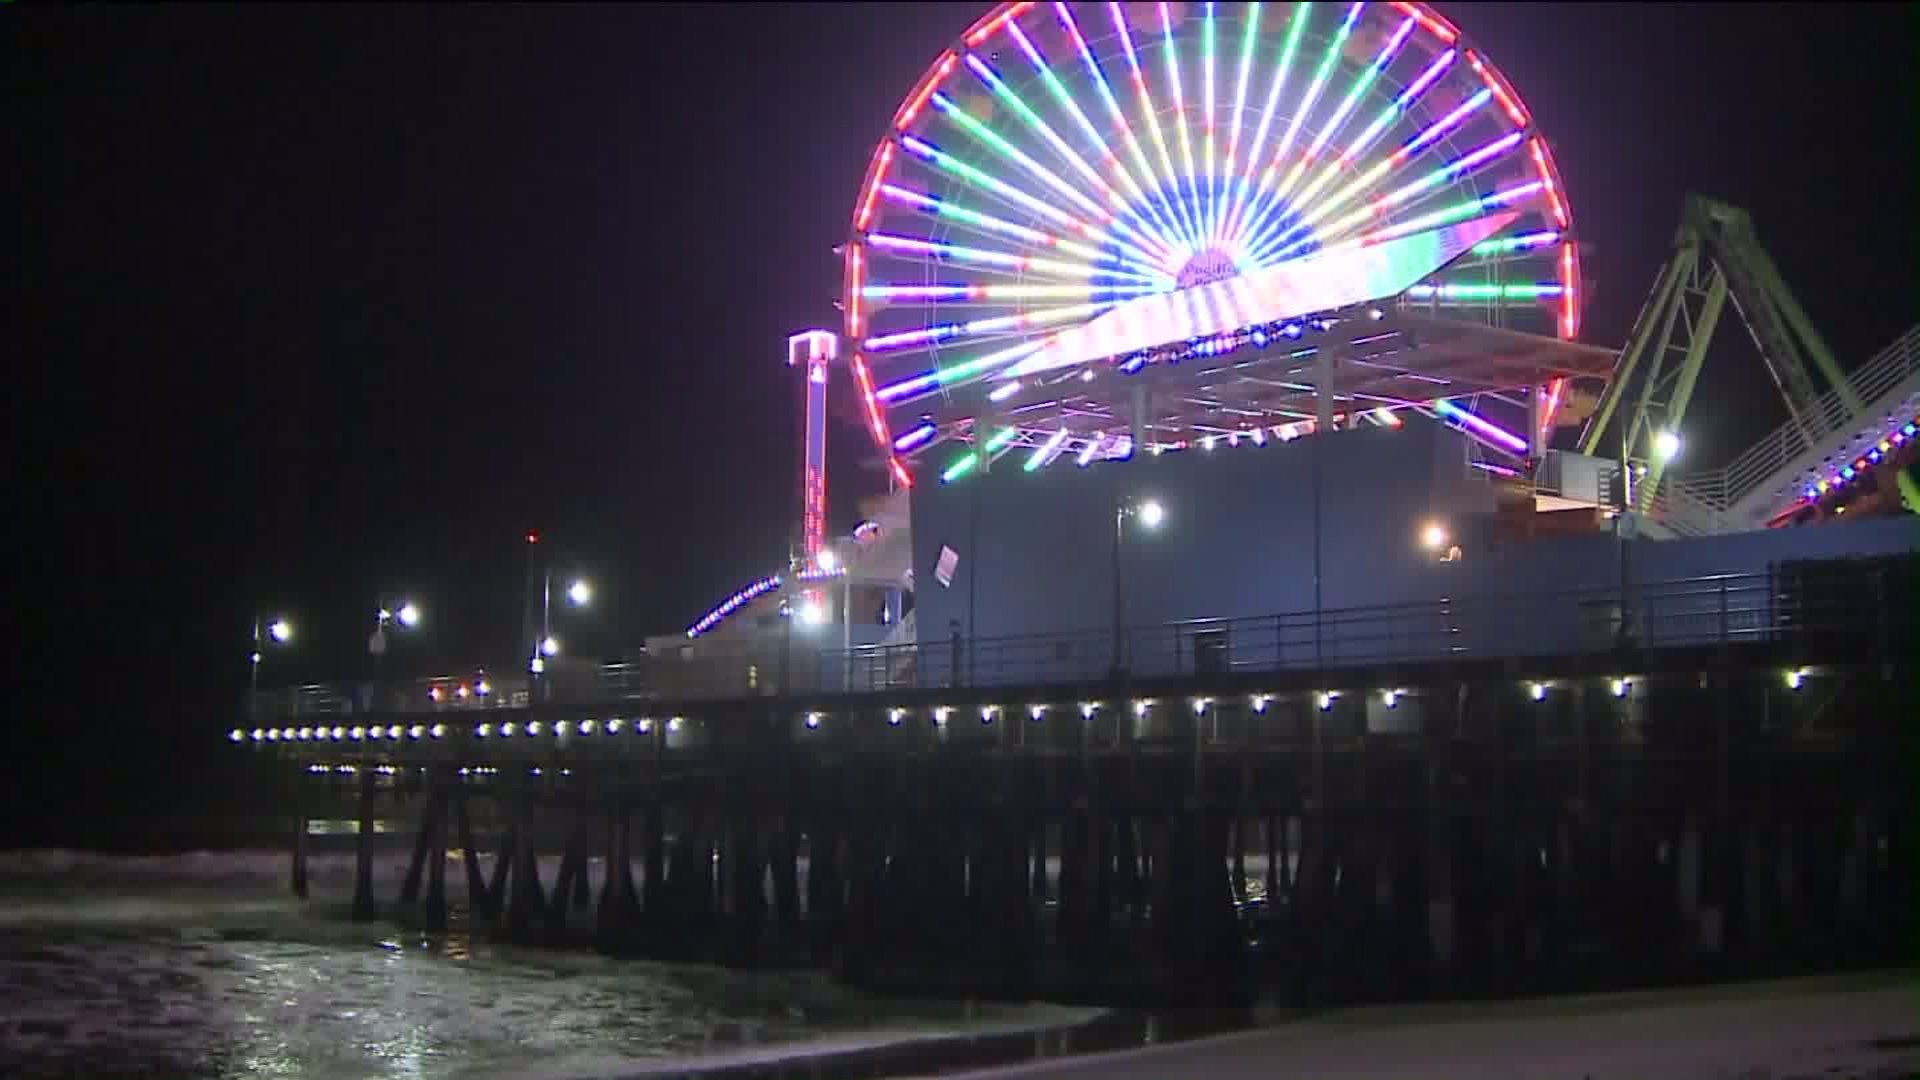 1920x1080 A swimmer was reported missing near the Santa Monica Pier on March 13, 2016.